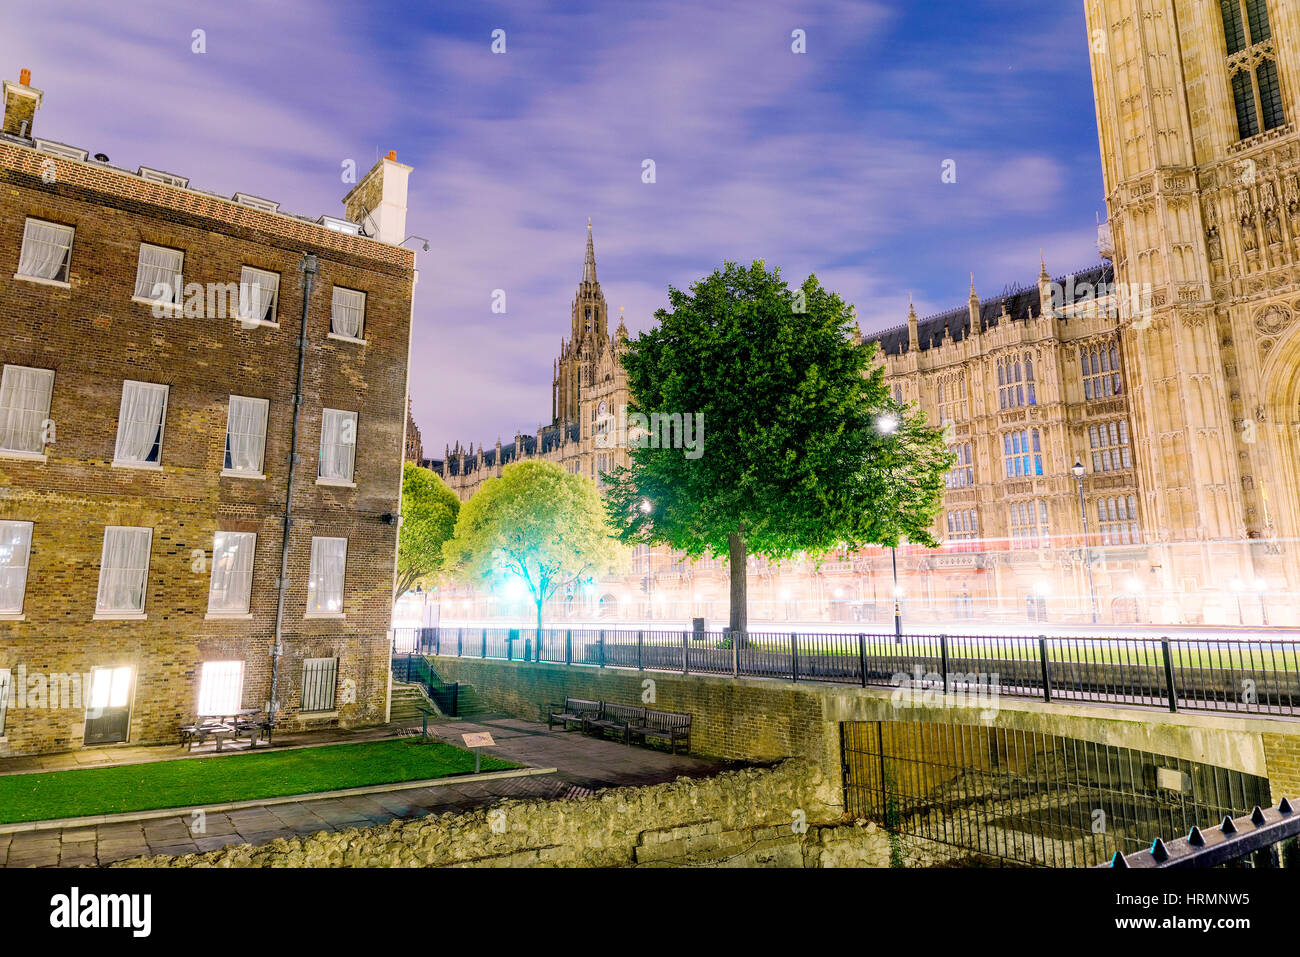 Jewel house and Houses of Parliament at night time Stock Photo